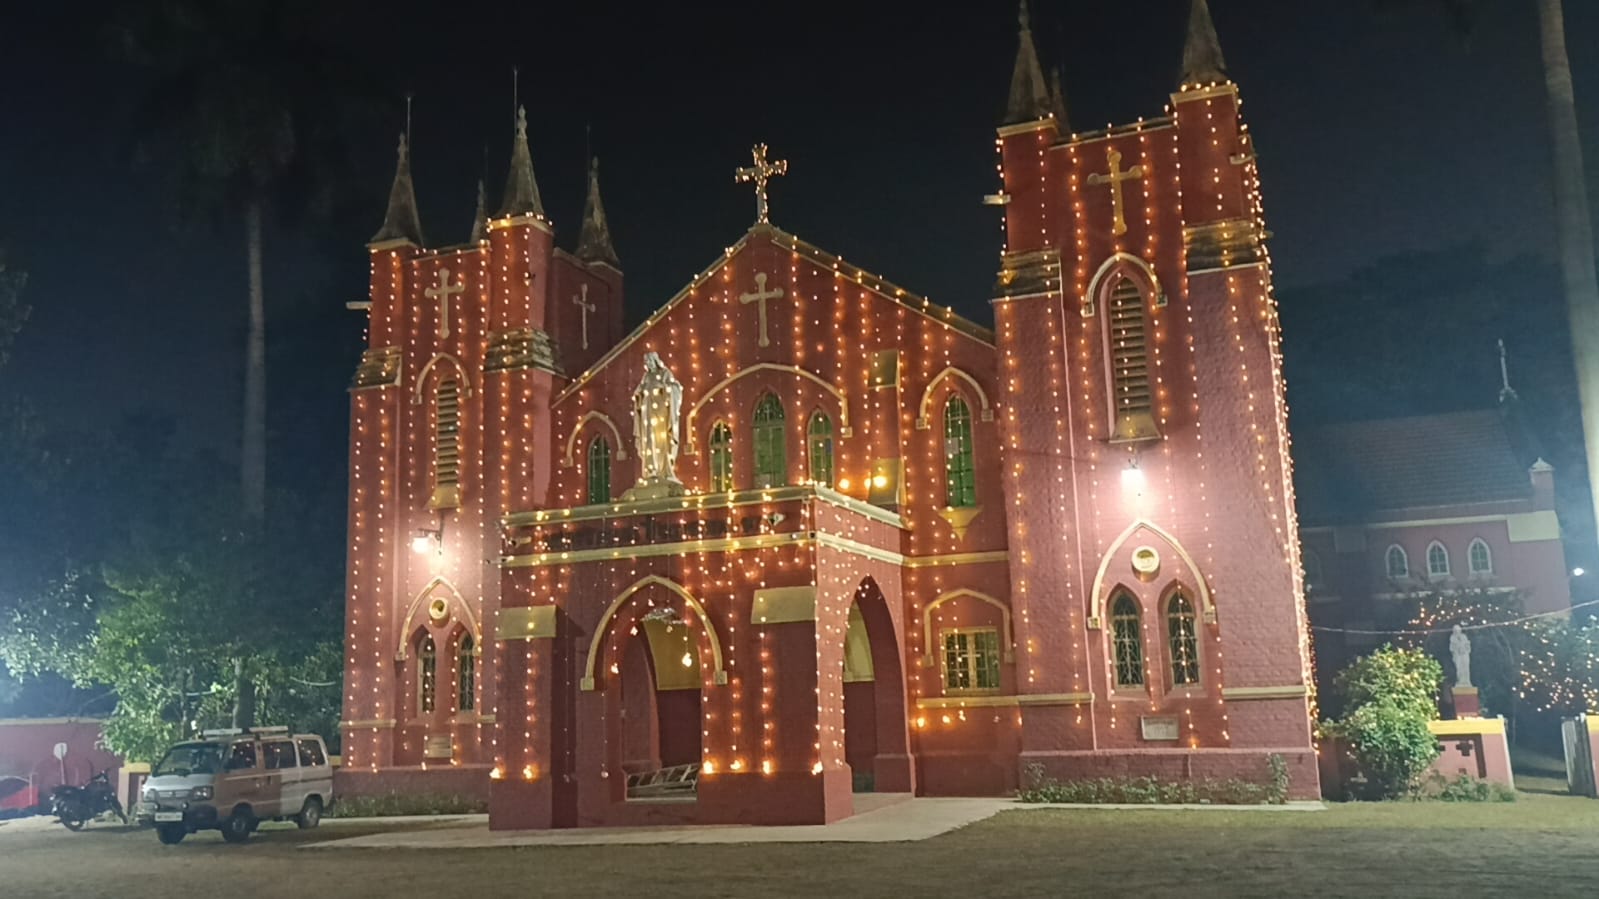 Asansol Sacred Heart Cathedral